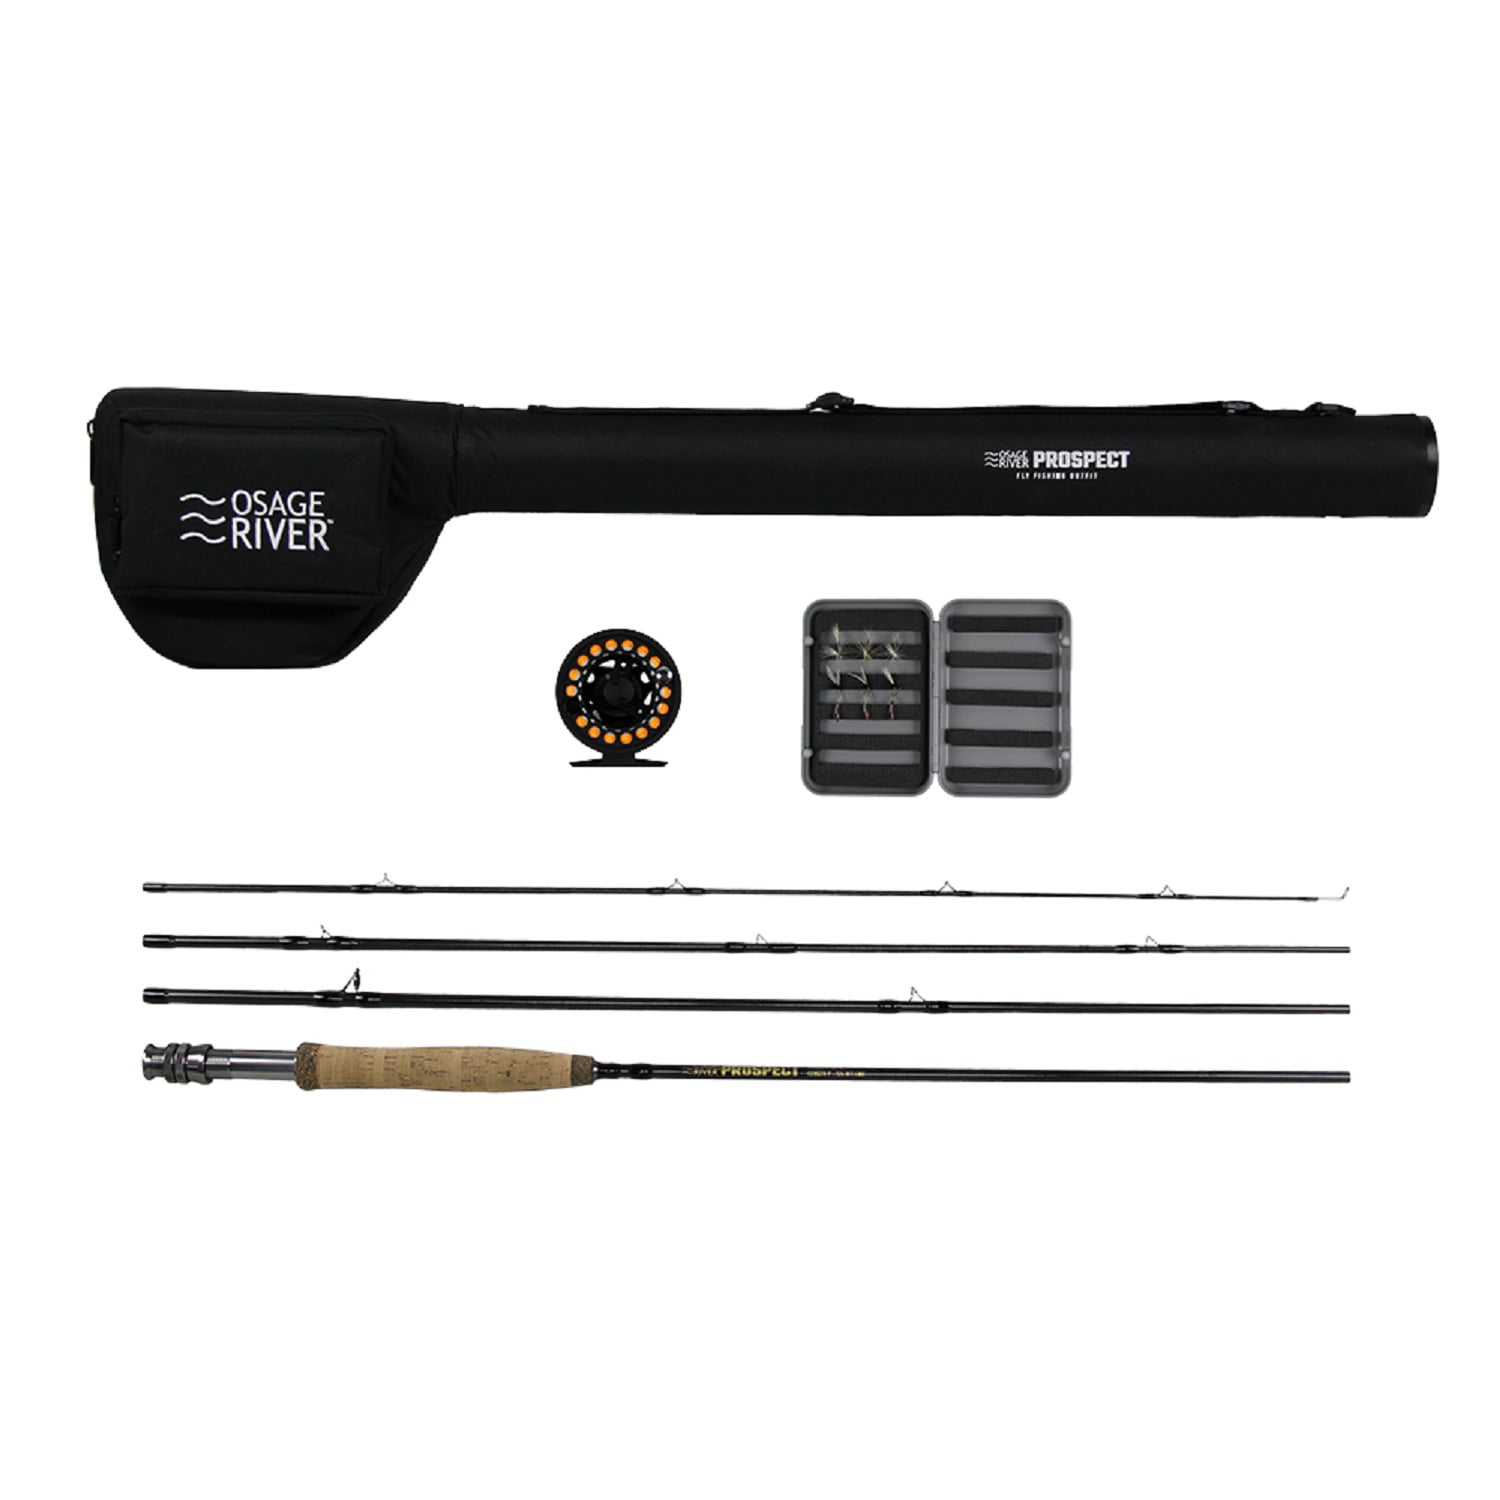 Osage River Prospect Complete Fly Fishing Rod and Reel Combo Pkg-5/6  9ftLength 